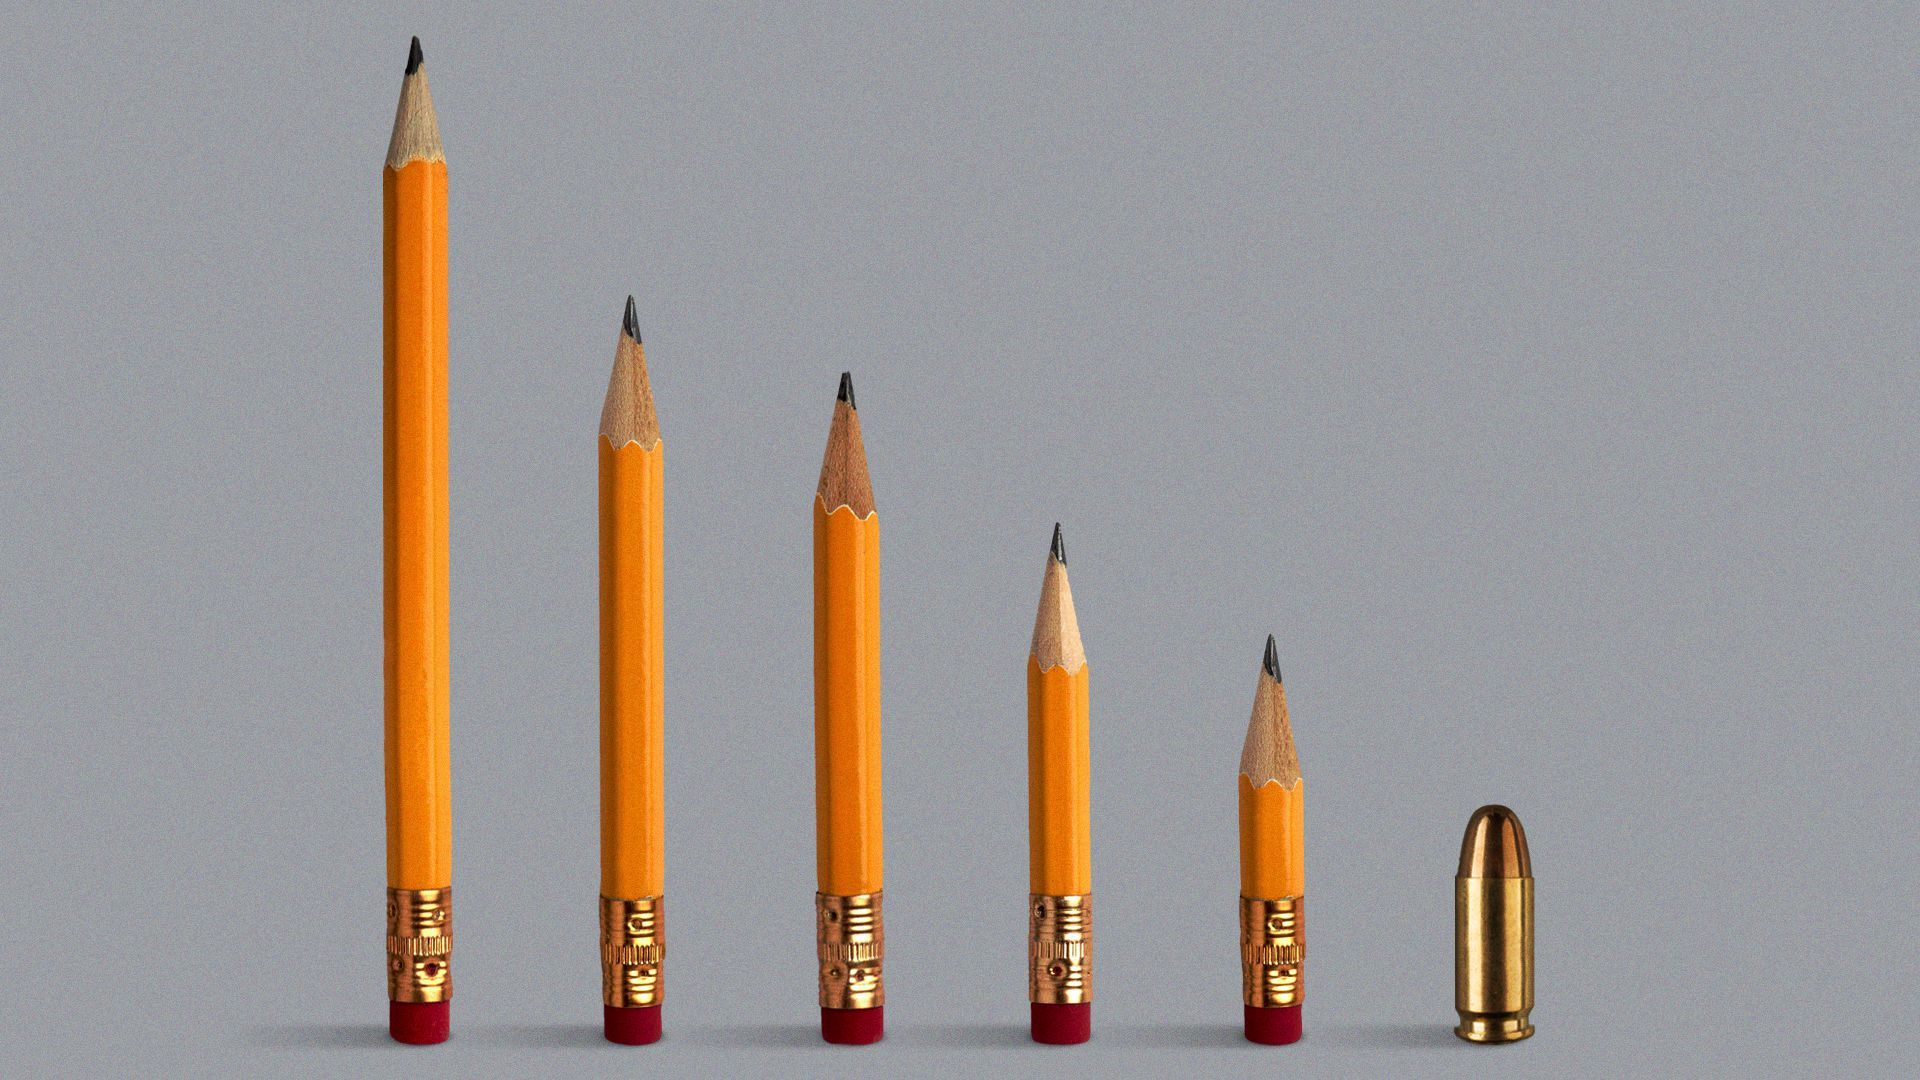 Illustration of a row of pencils getting shorter with a bullet at the end.